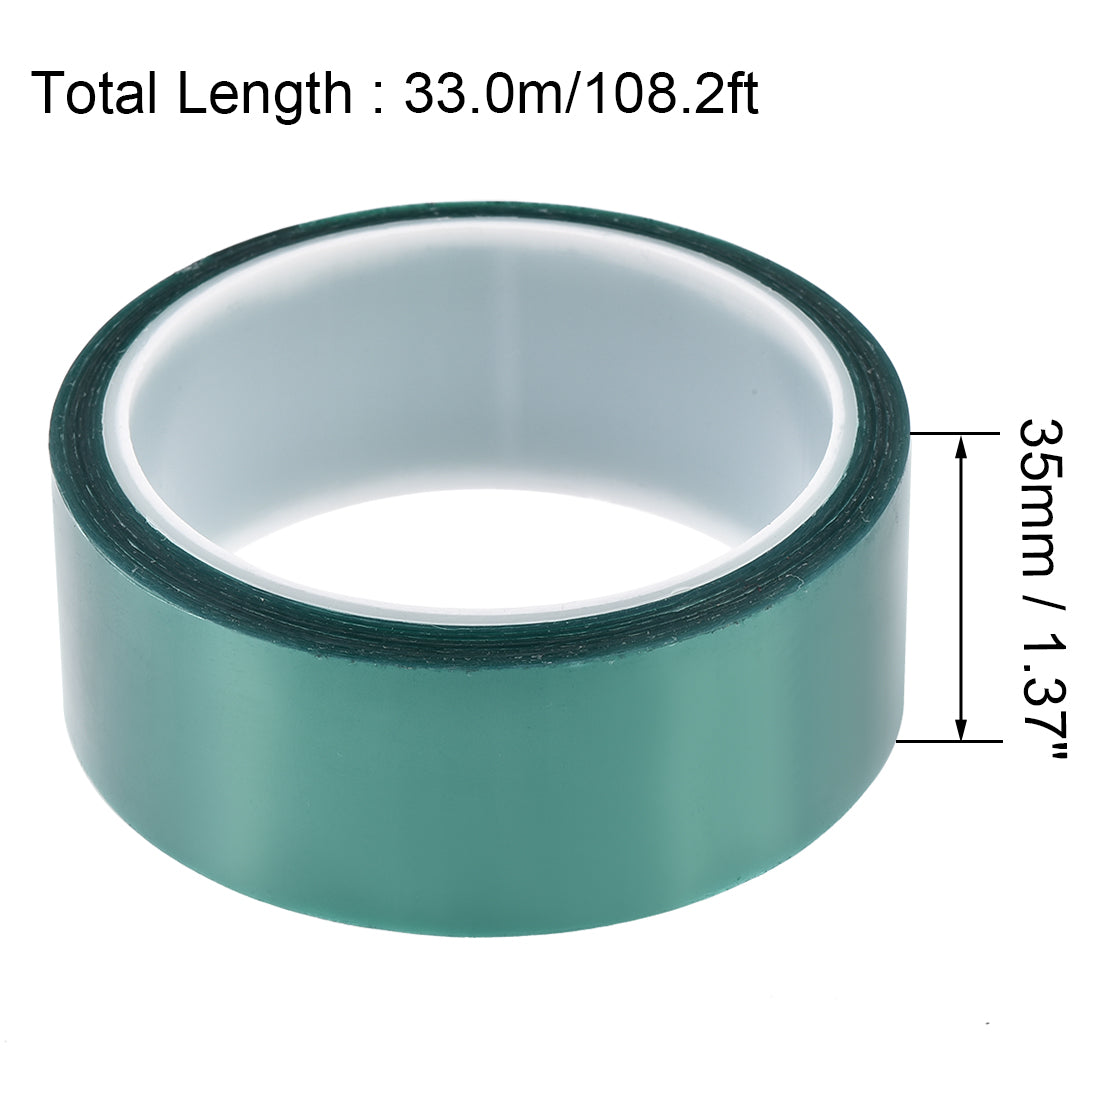 uxcell Uxcell PET Tape Green Polyester High Temperature Tape for Powder Coating Masking Adhesive Tape 33m/ 108.2ft 1pcs